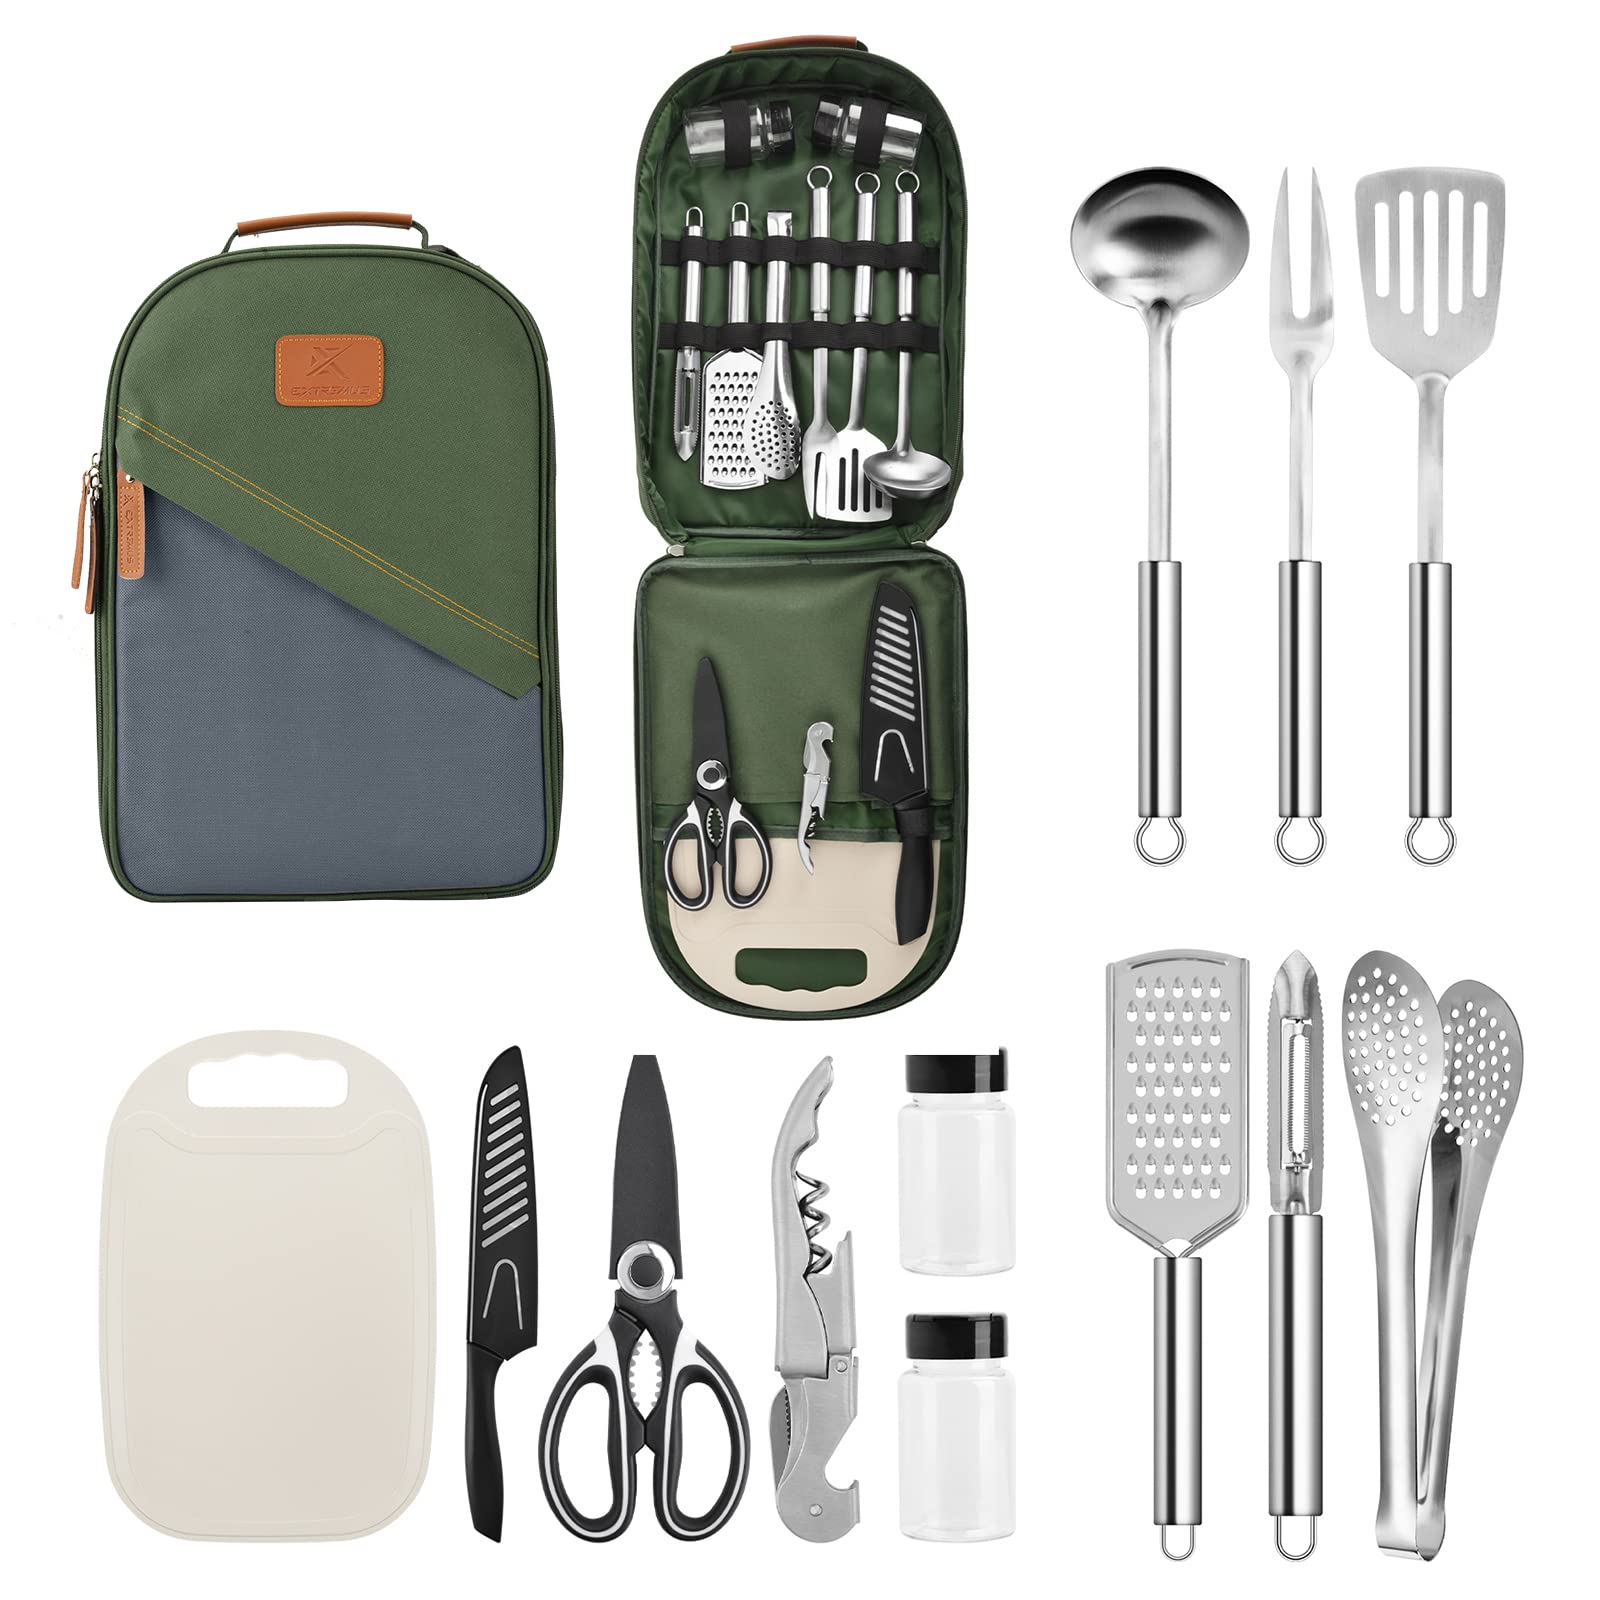 M MCIRCO Camping Cooking Utensils Set Camp Kitchen Equipment Portable  Picnic Cookware Kit Bag Campfire Grill Utensil Gear Essentials Gadgets  Accessories for RV Car, Tent Campers, Outdoor Picnics BBQ 